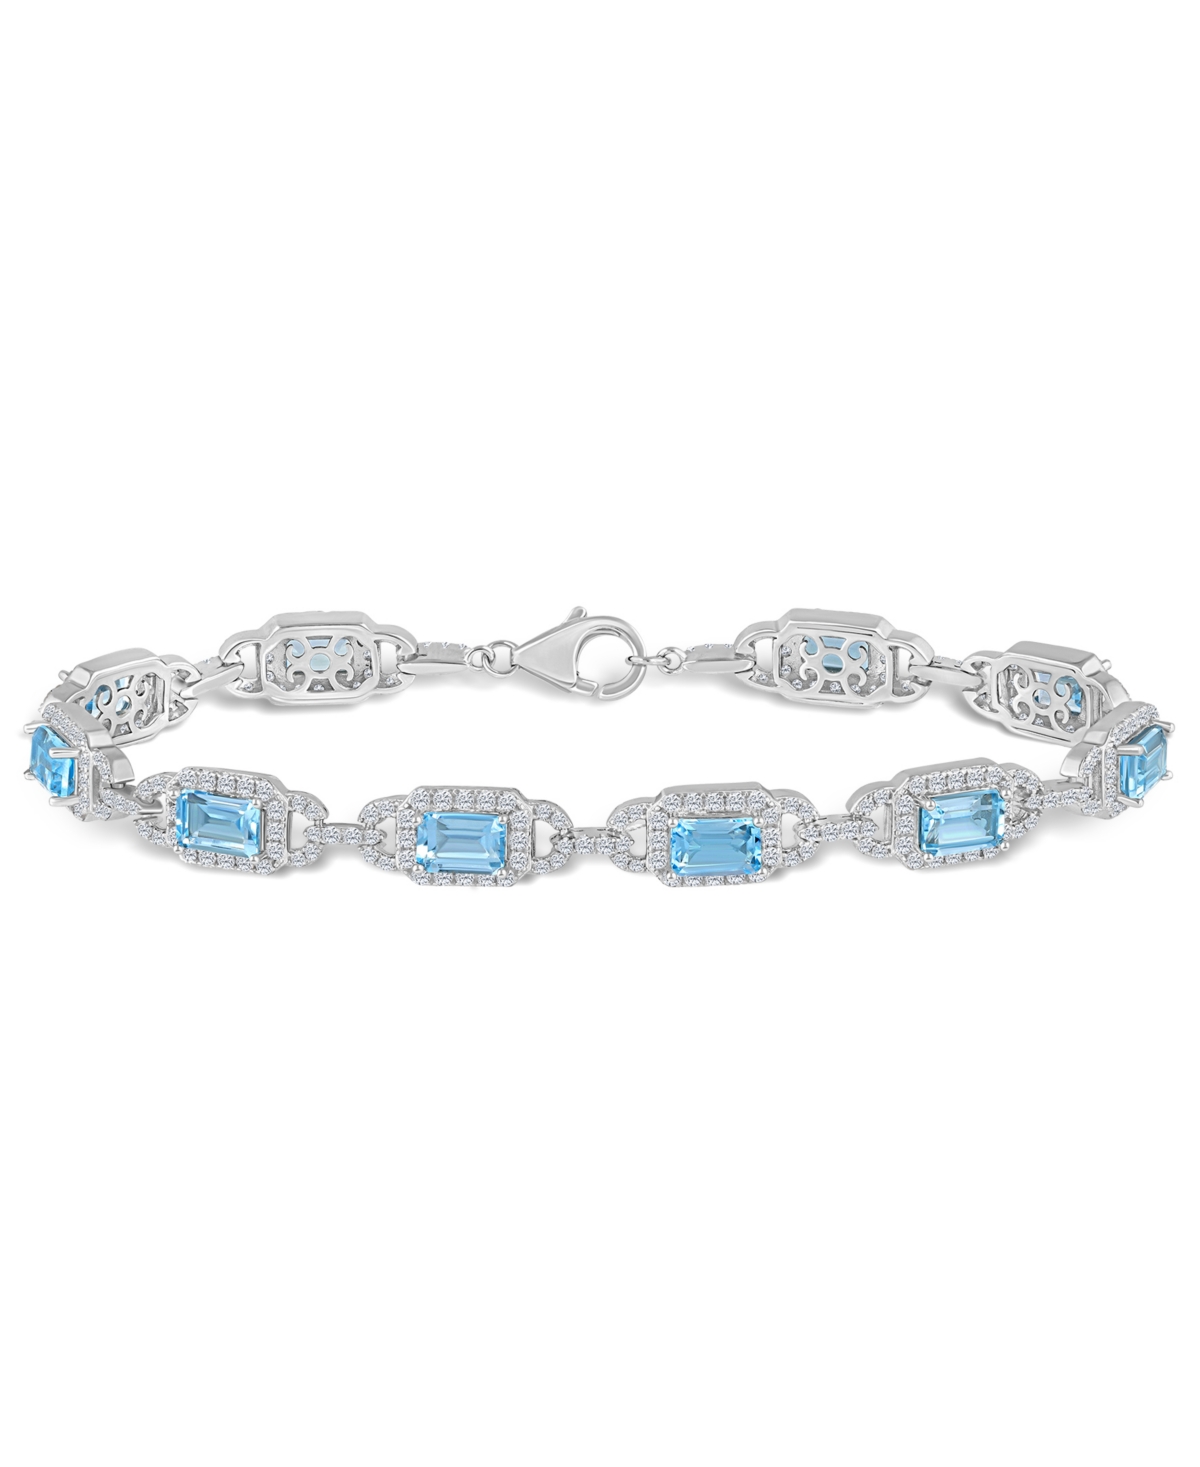 Macy's Sky Blue Topaz And White Topaz Bracelet (7 Ct. T.w And 5/8 Ct. T.w) In Sterling Silver